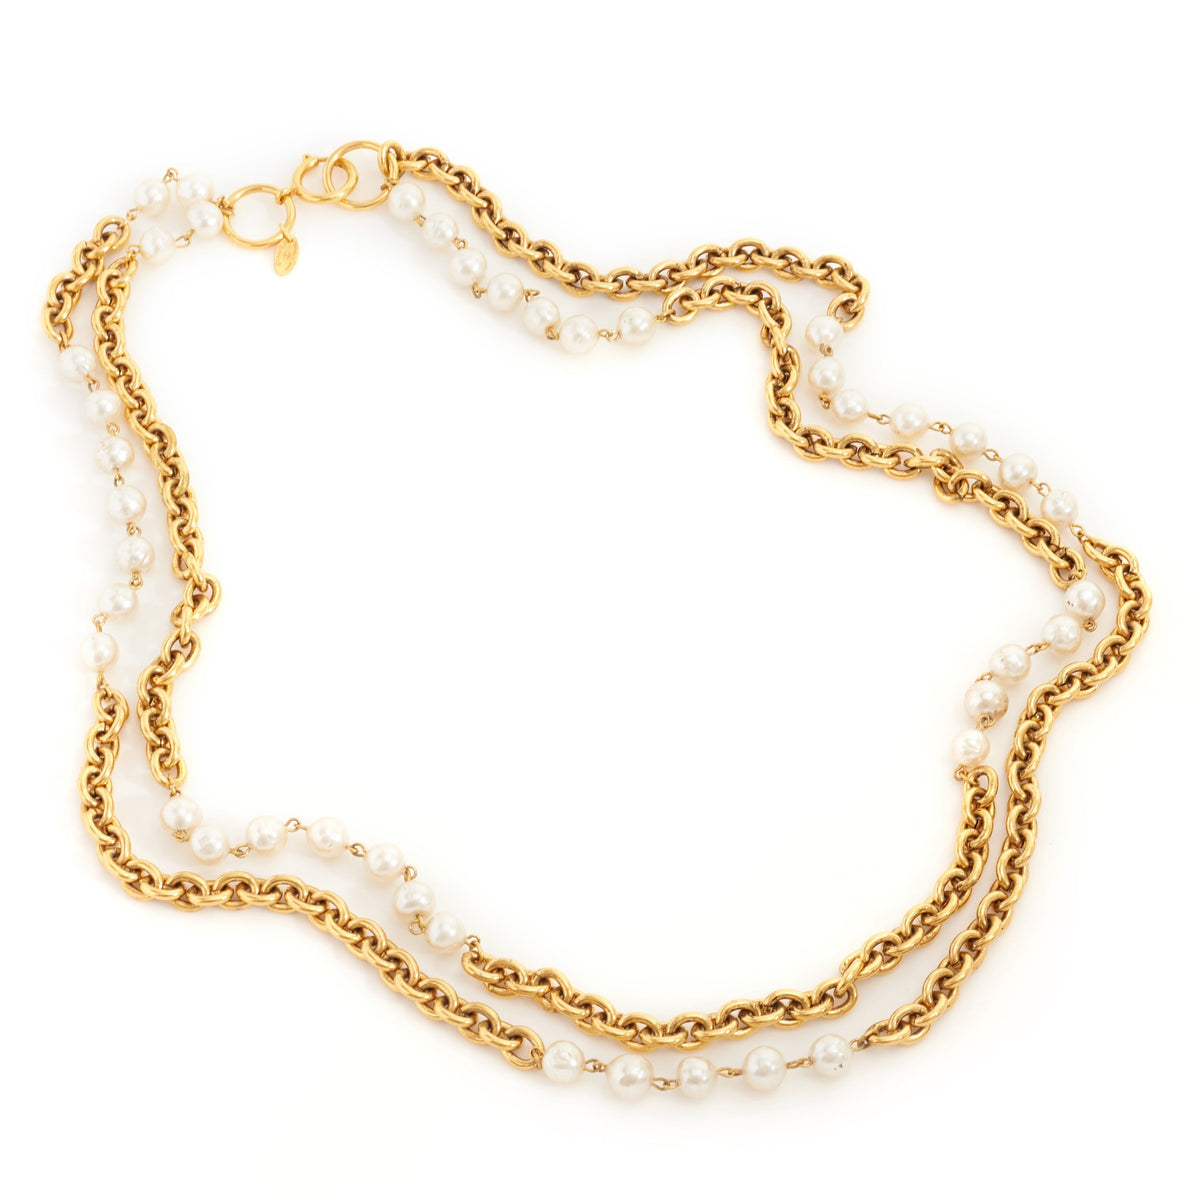 Gold Metal Imitation Pearl CC Choker Chain Necklace, 1985